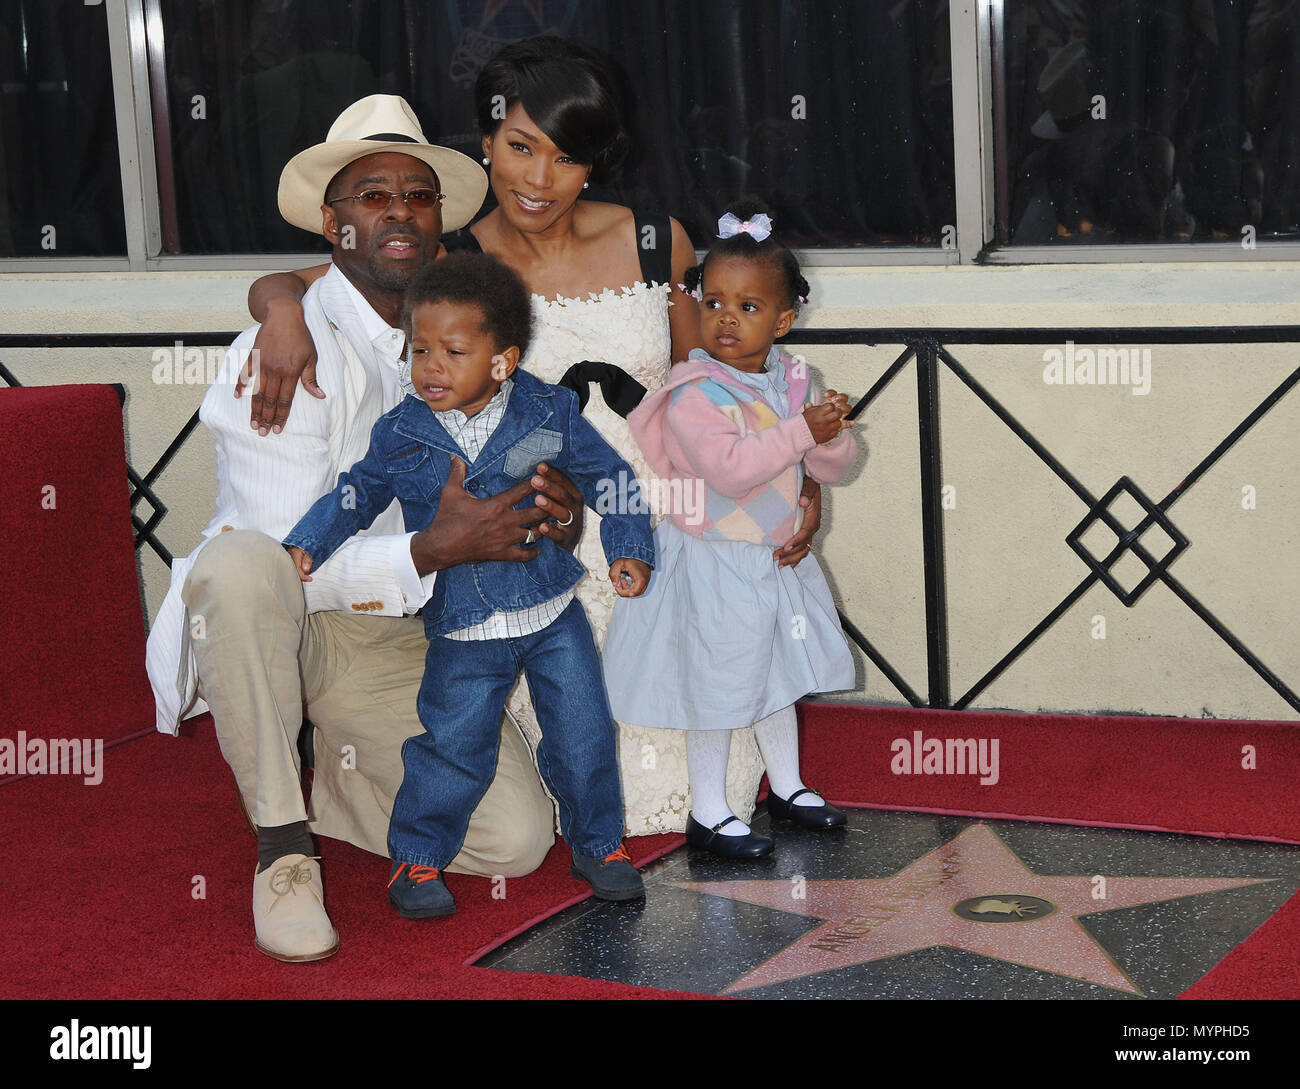 Angela Bassett, Courtney Vance, Bronwyn Golden and Slater Josiah, -  Angela Bassett Honored with a Star on the Hollywood Walk Of Fame In Los Angeles.  family picture full length eye contact smile 07 BassettAngela VanceC kids 07  Event in Hollywood Life - California, Red Carpet Event, USA, Film Industry, Celebrities, Photography, Bestof, Arts Culture and Entertainment, Celebrities fashion, Best of, Hollywood Life, Event in Hollywood Life - California, Red Carpet and backstage, Music celebrities, Topix, Couple, family ( husband and wife ) and kids- Children, brothers and sisters inquiry tsuni@Ga Stock Photo